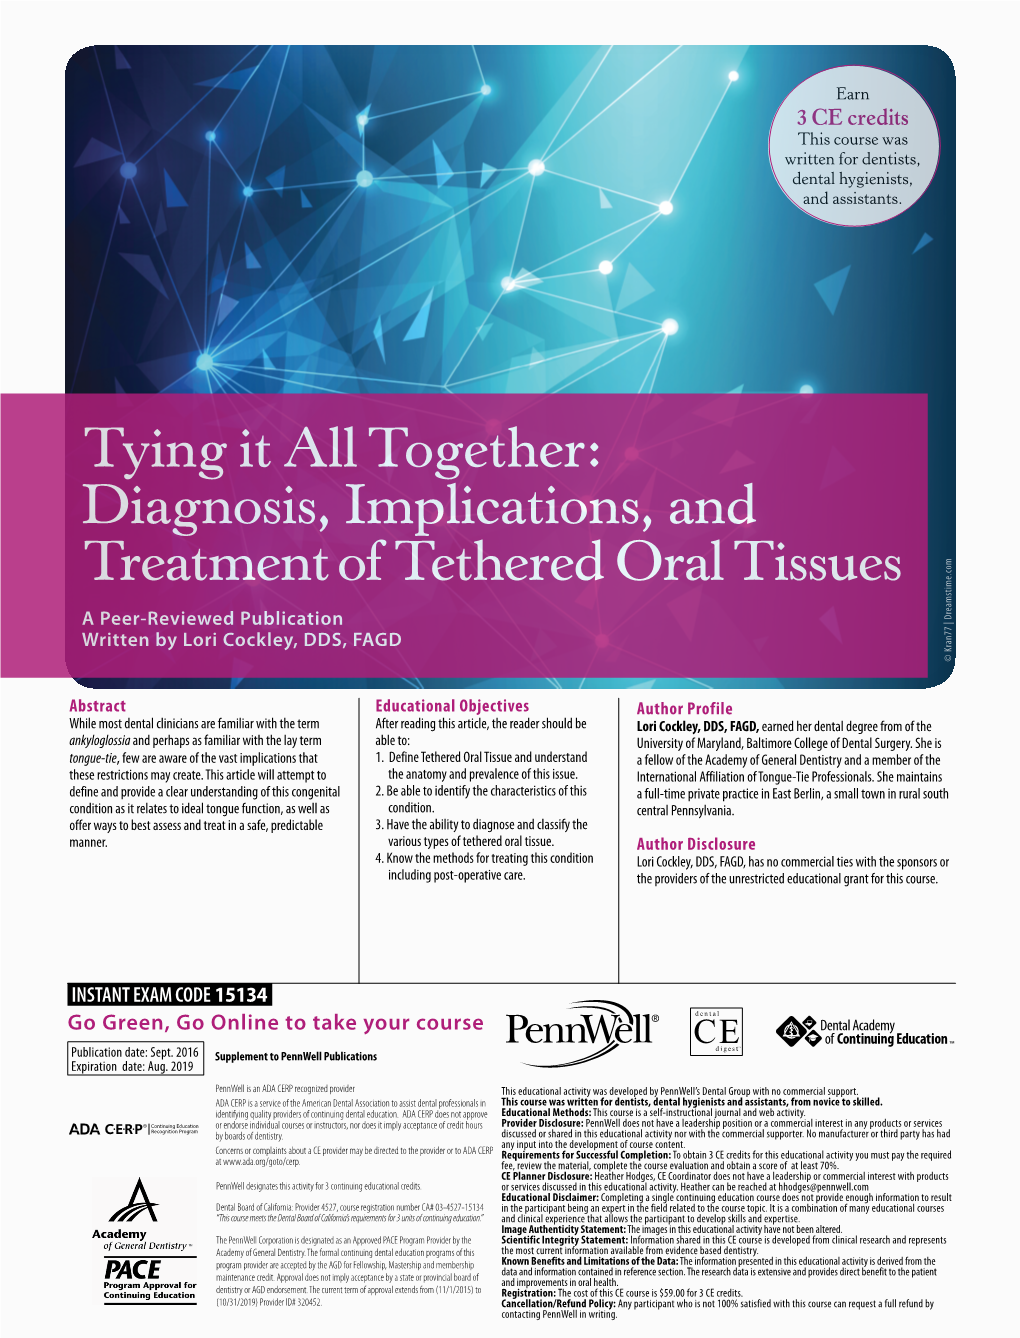 Tying It All Together: Diagnosis, Implications, and Treatment of Tethered Oral Tissues